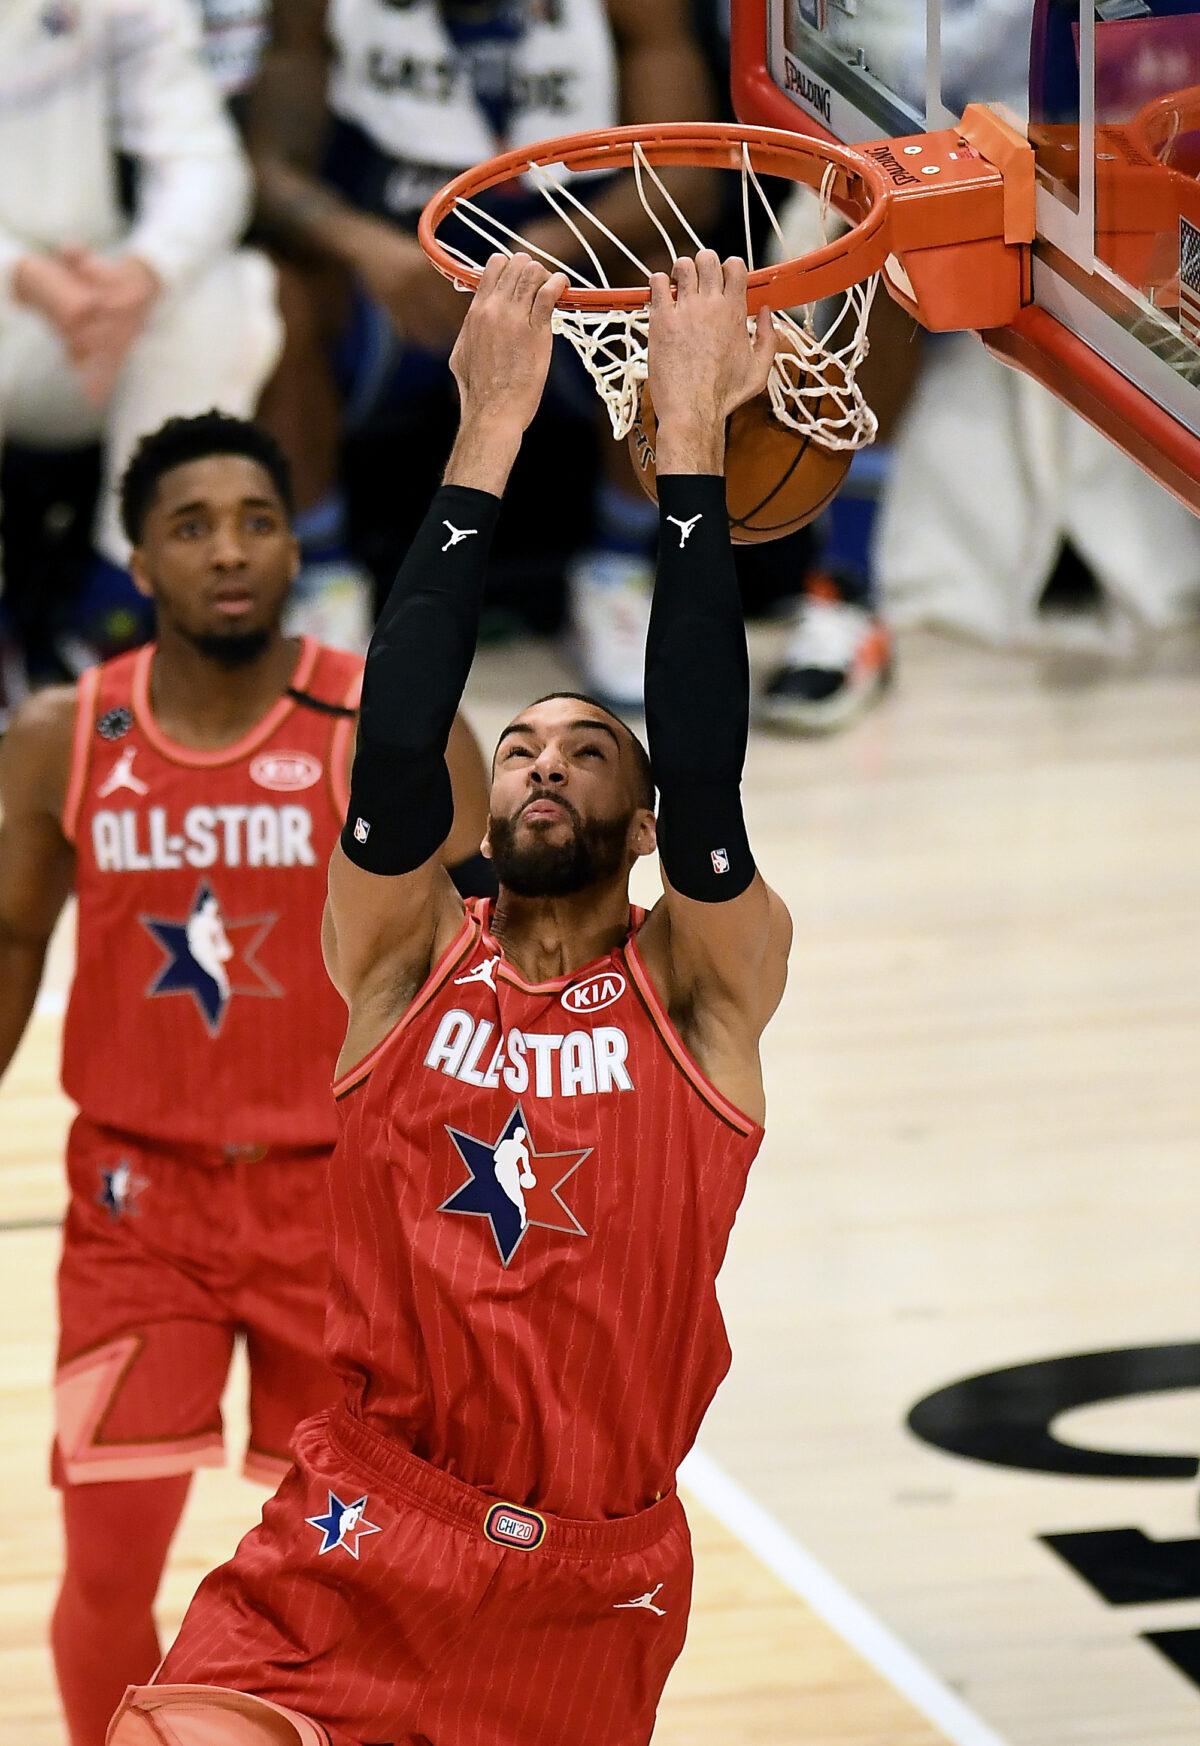 Rudy Gobert #24 of Team Giannis dunks the ball in the third quarter against Team LeBron during the 69th NBA All-Star Game at the United Center in Chicago, Illin on Feb. 16, 2020. Donovan Mitchell, background, watches. (Stacy Revere/Getty Images)